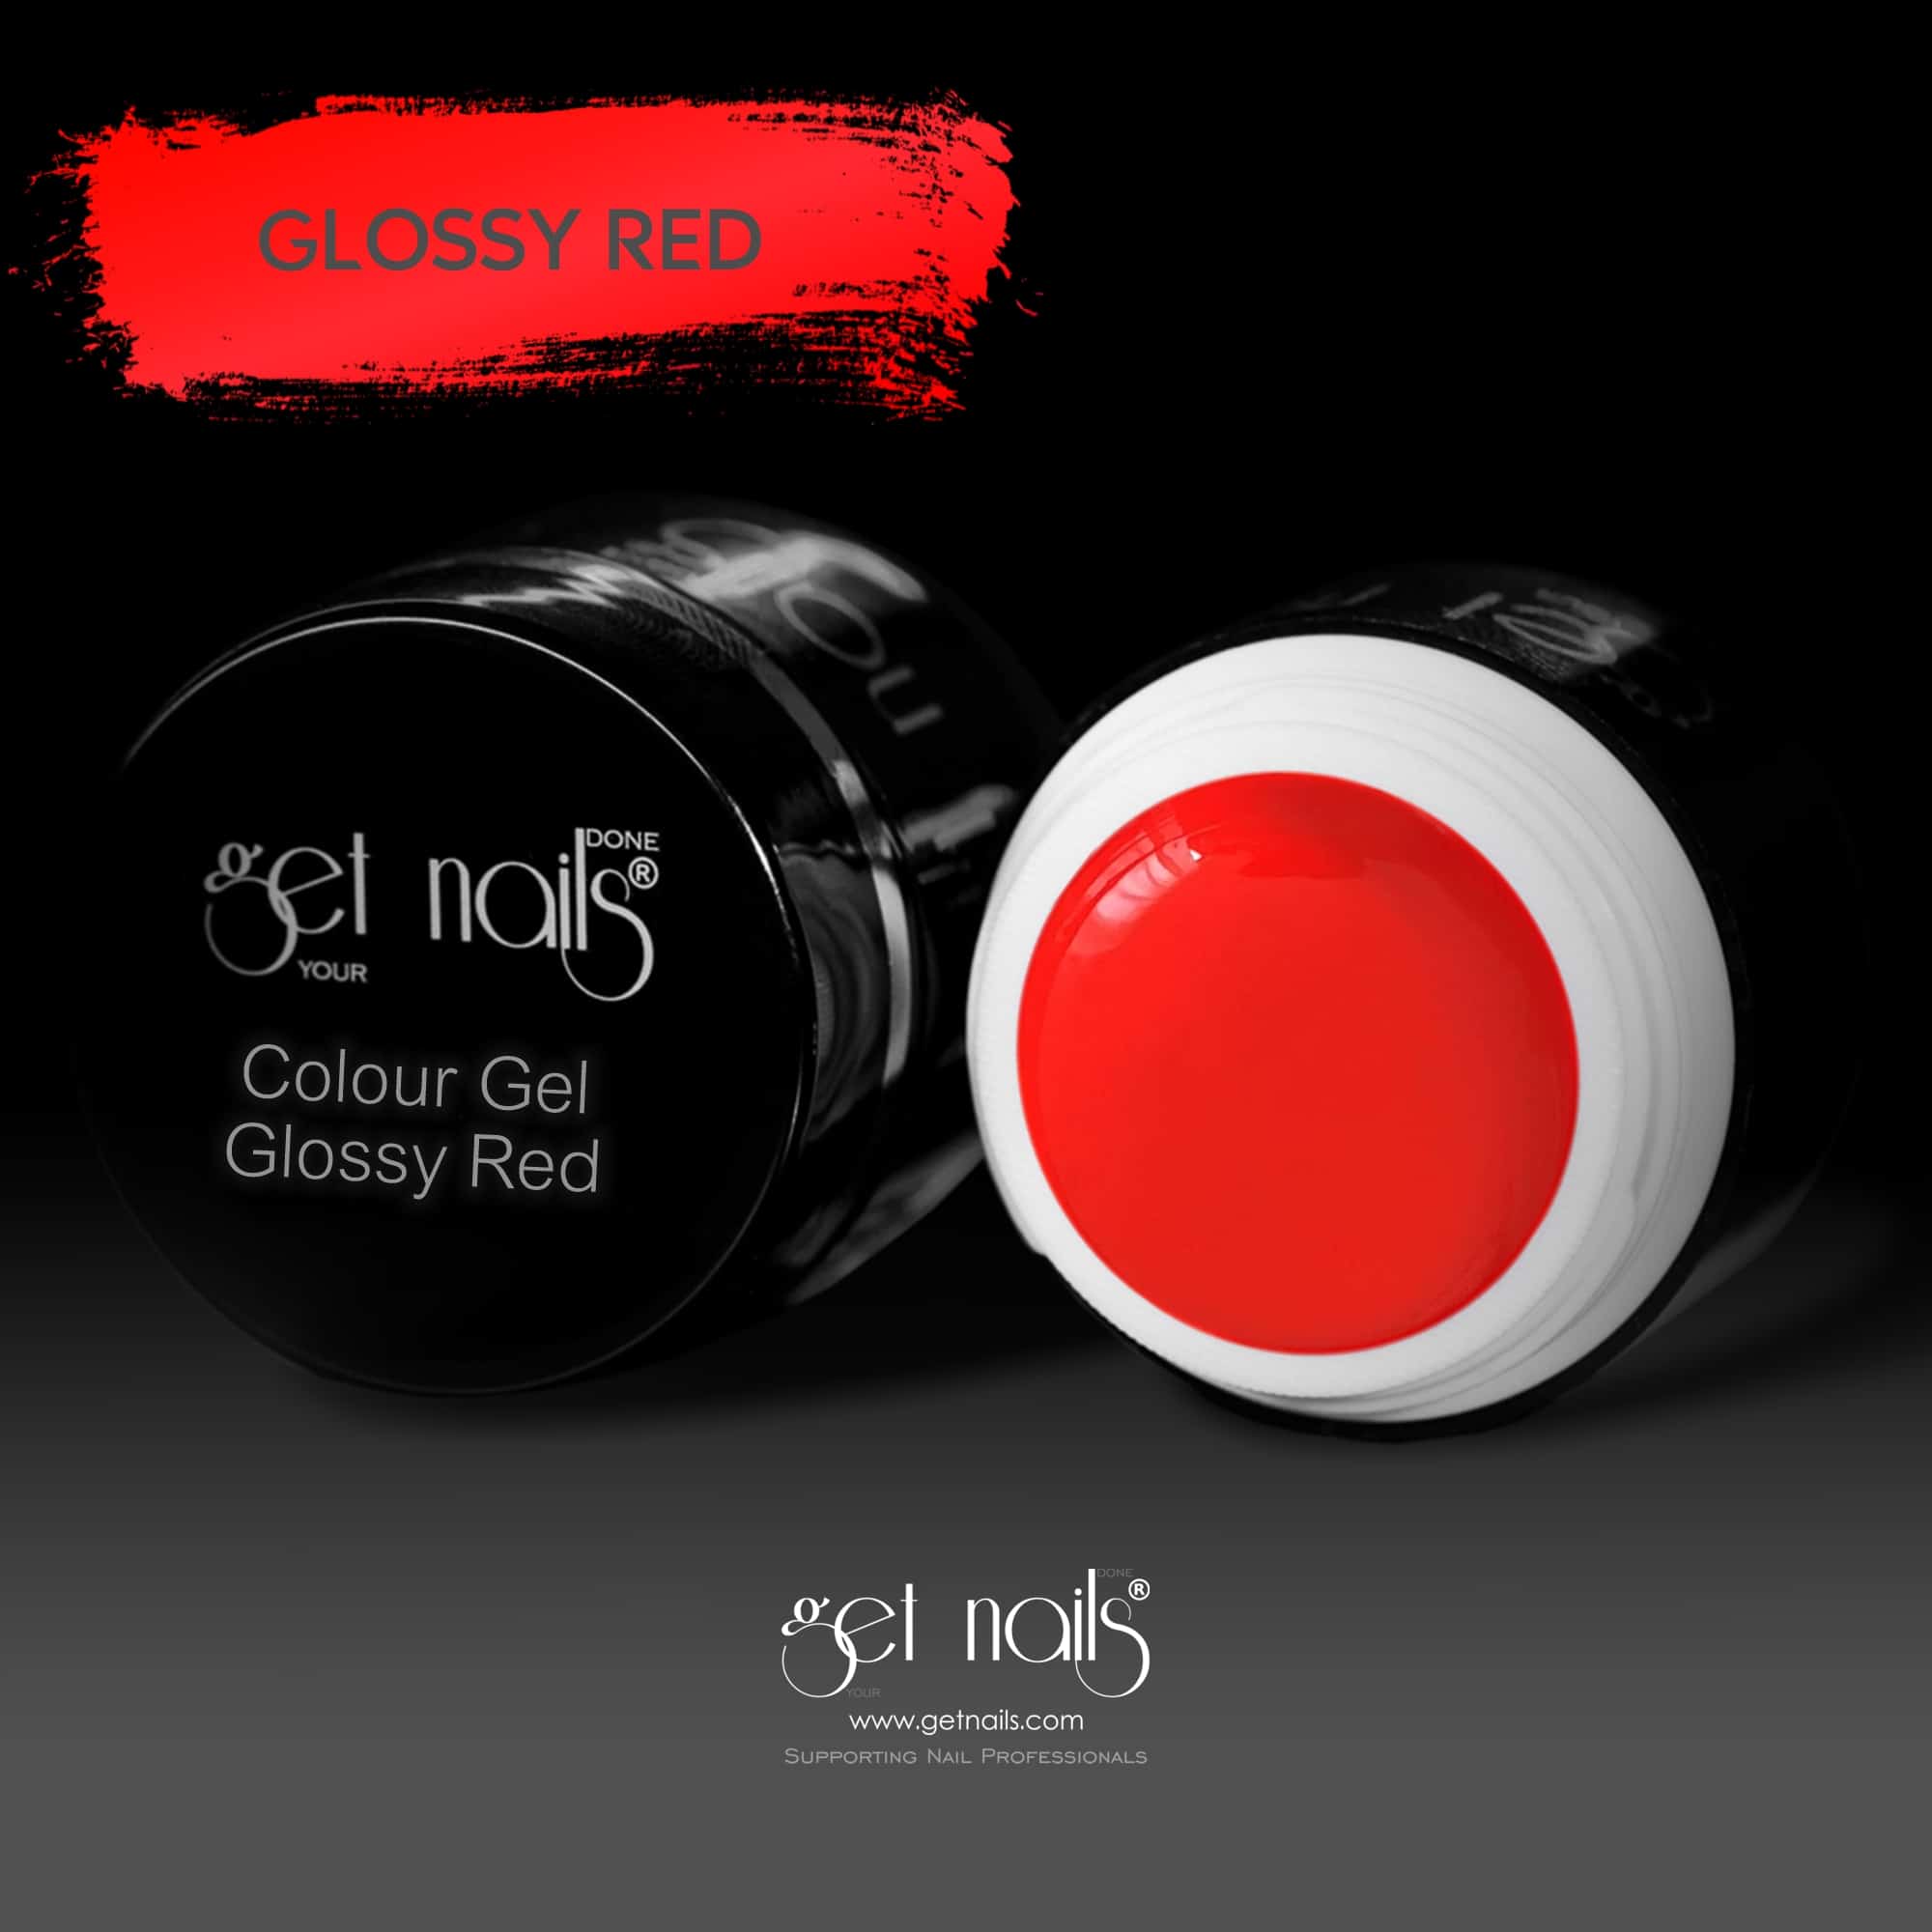 Get Nails Austria - Color Gel Glossy Red 5g